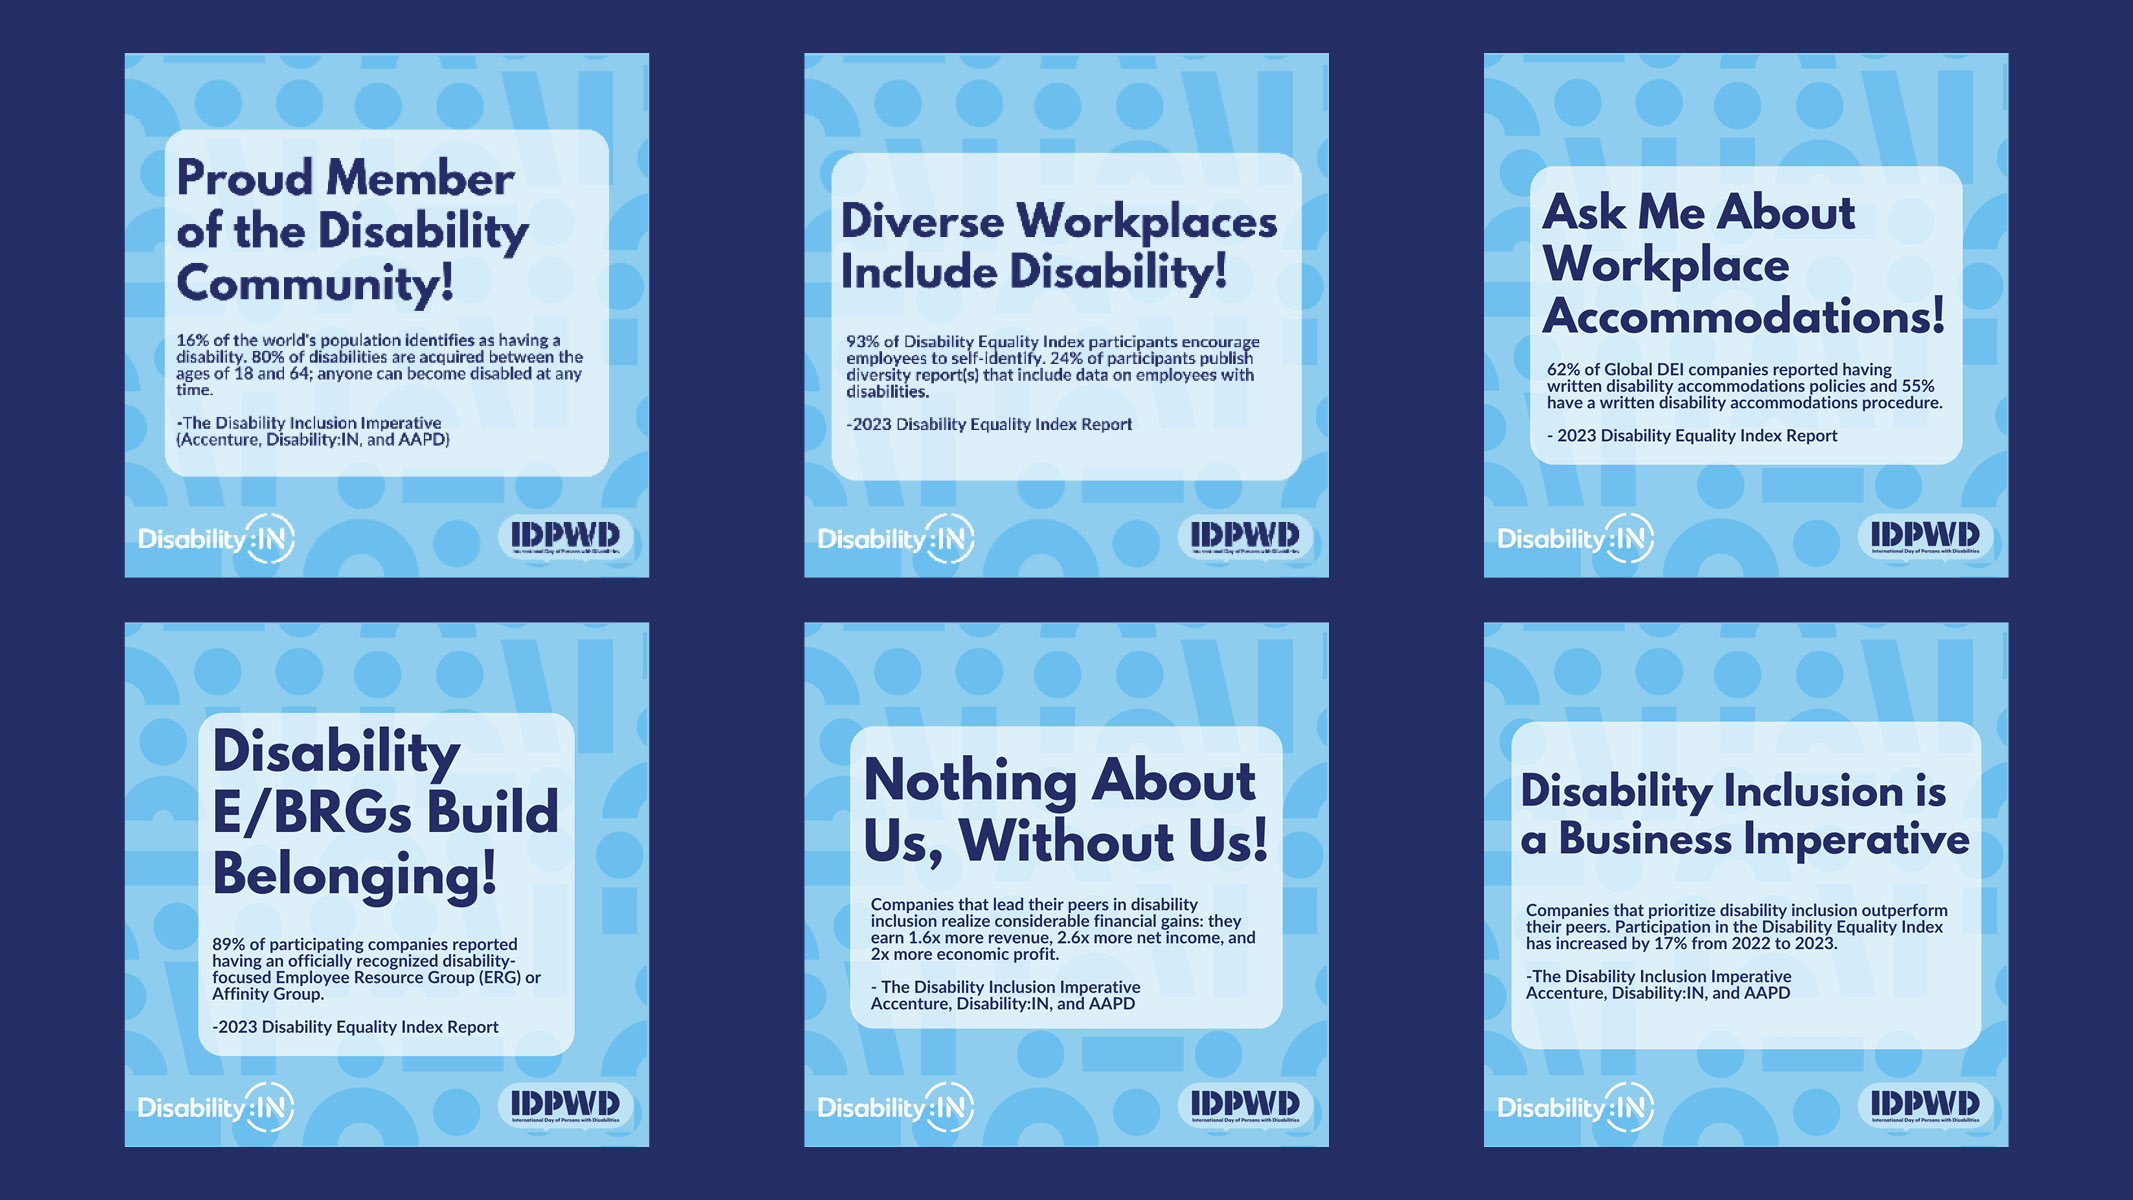 Six social graphics that display statements: Proud Member of the Disability Community!, Diverse Workplaces Include Disability!, Ask Me About Workplace Accommodations!, Disability E/BRGs Build Belonging!, Nothing About Us Without Us!, and Disability Inclusion is a Business Imperative. Detailed image descriptions in download link.